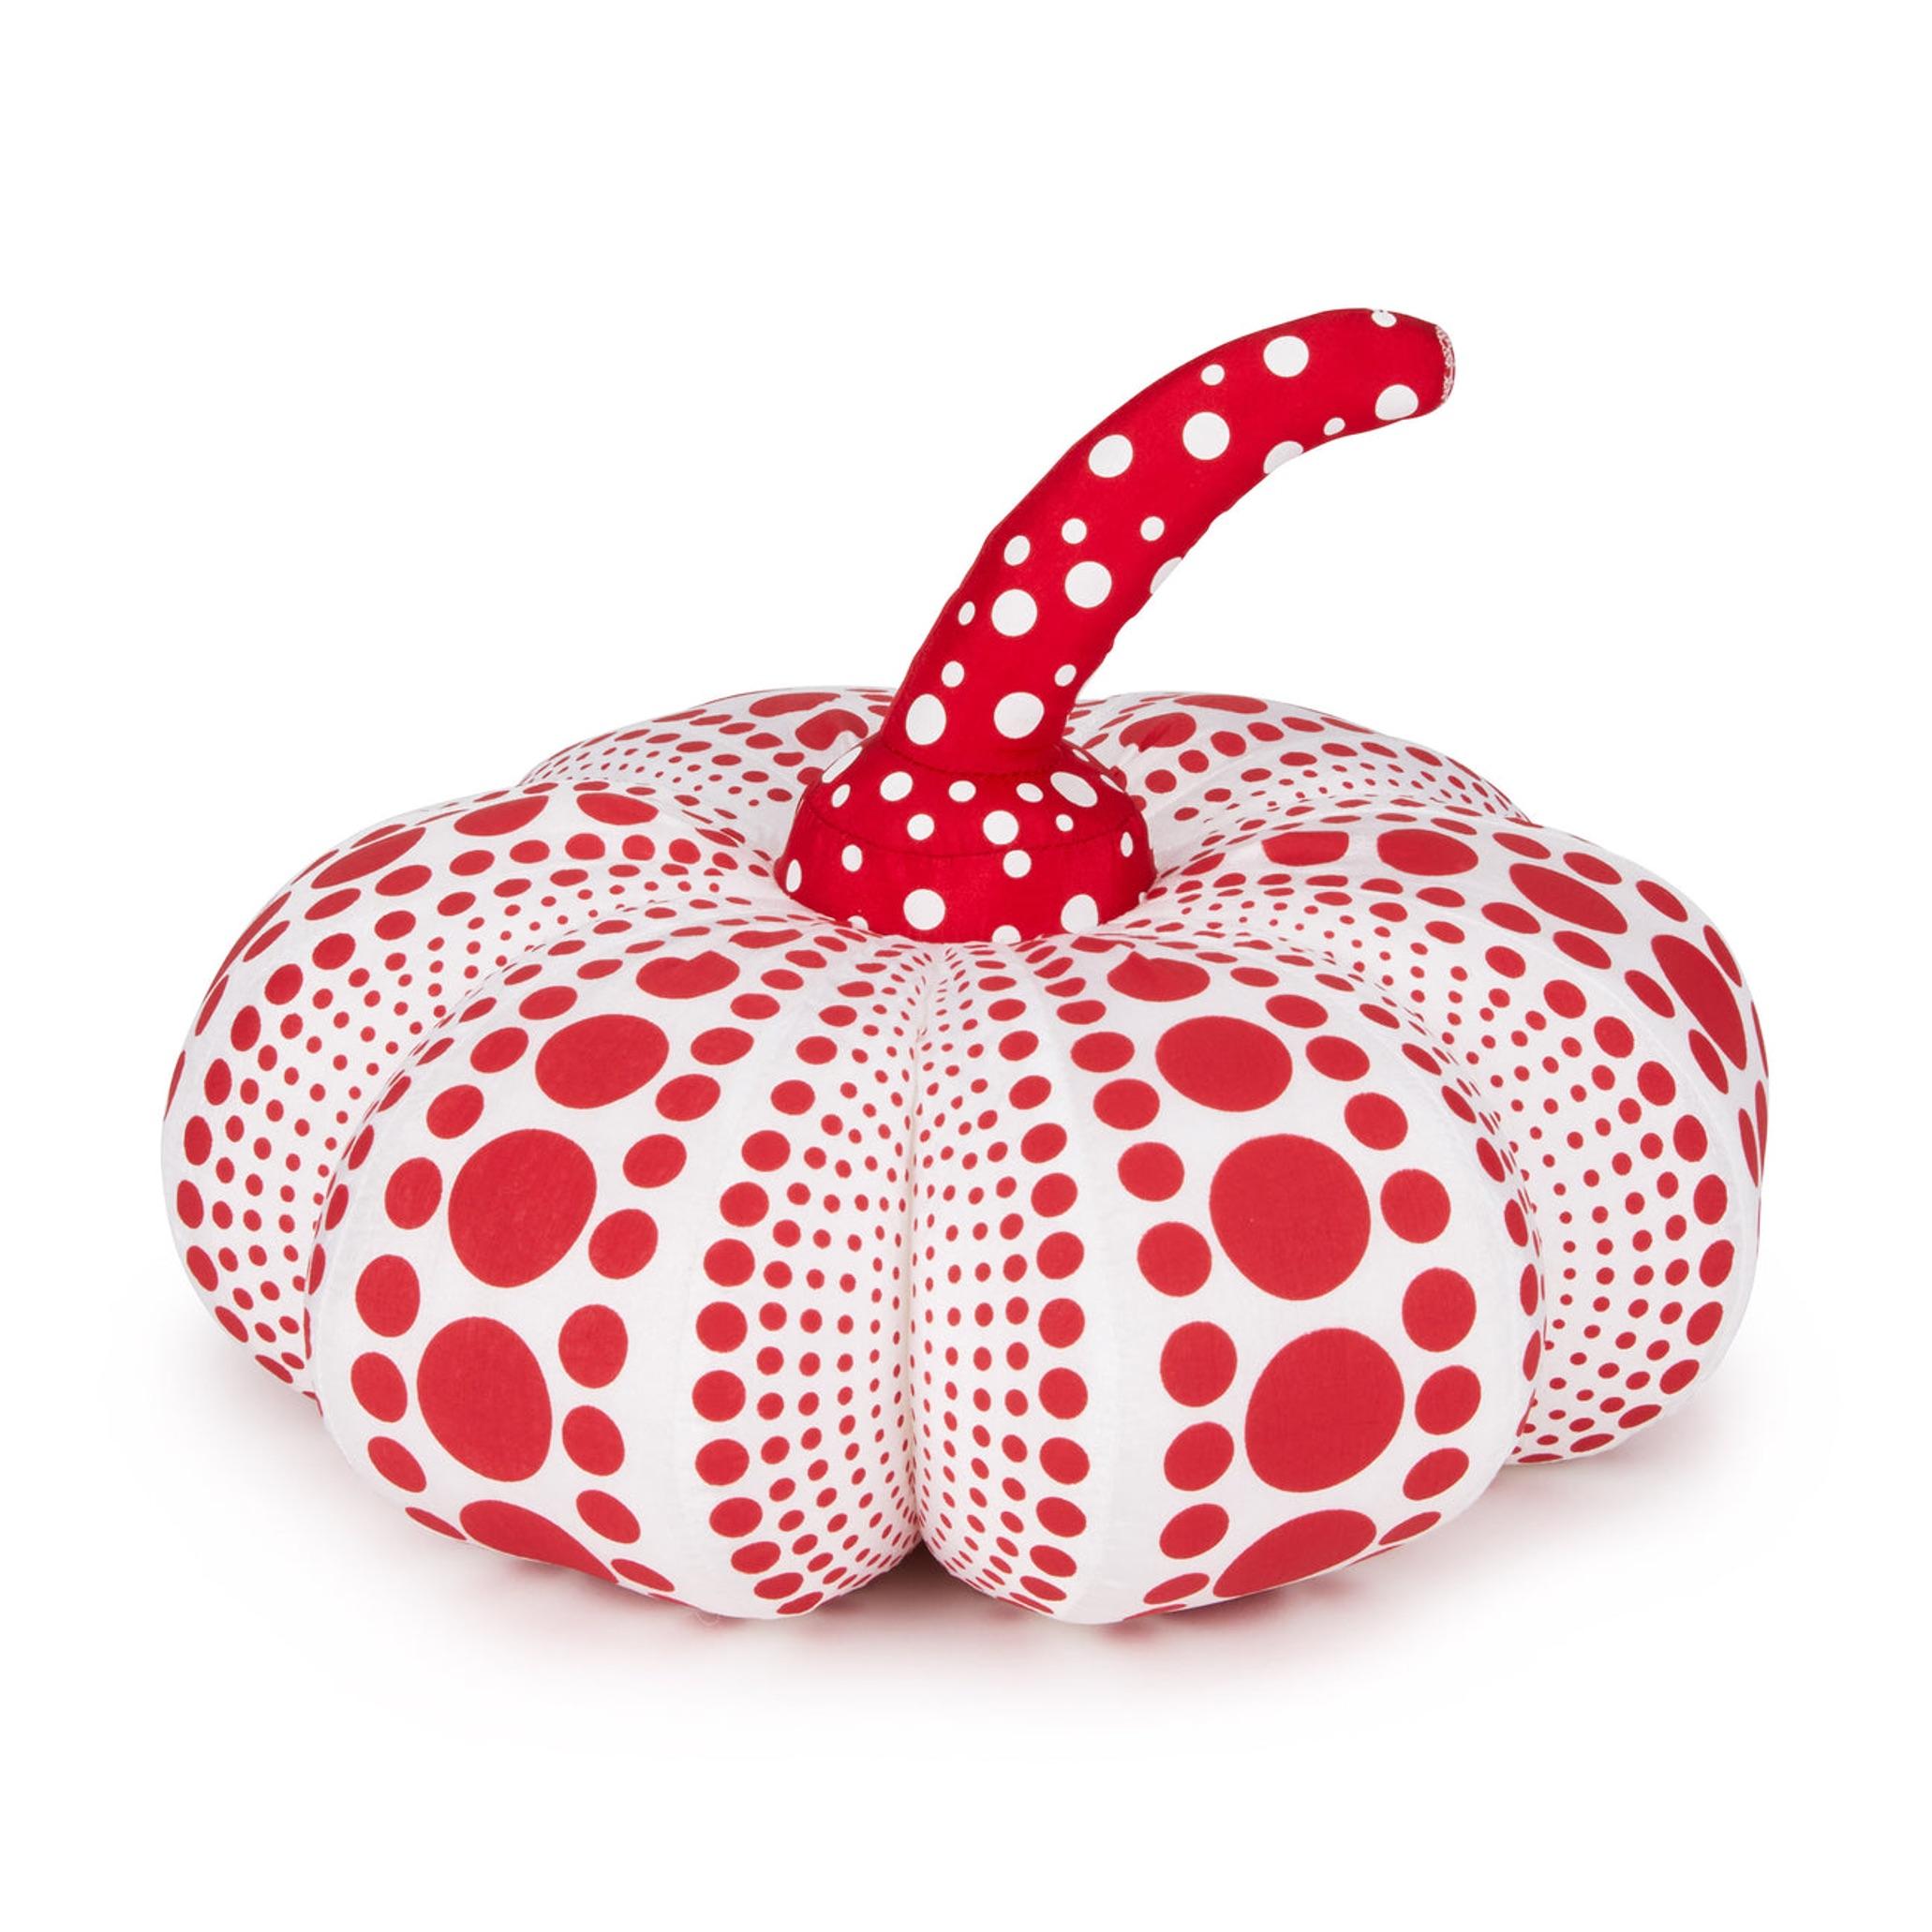 Yayoi Kusama
Large Set of 2 Pumpkin Plush Yellow and Black & Red and White, 2004
Polyester, Nylon
13 4/5 × 21 7/10 × 21 7/10 in  35 × 55 × 55 cm (each)
